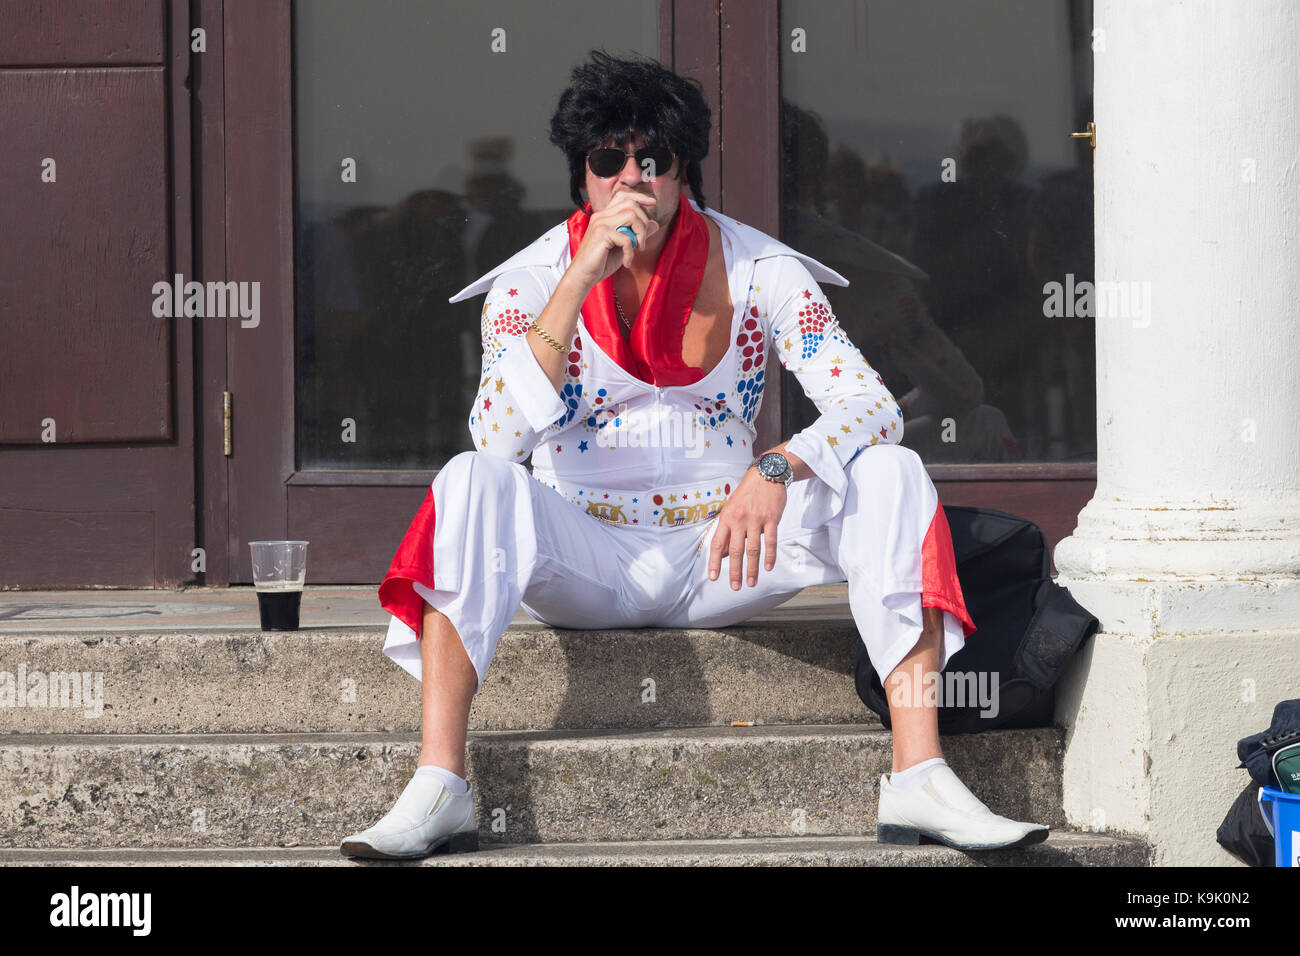 Elvis Presley look-a-like at the Elvis Festival in Porthcawl, Wales Stock Photo